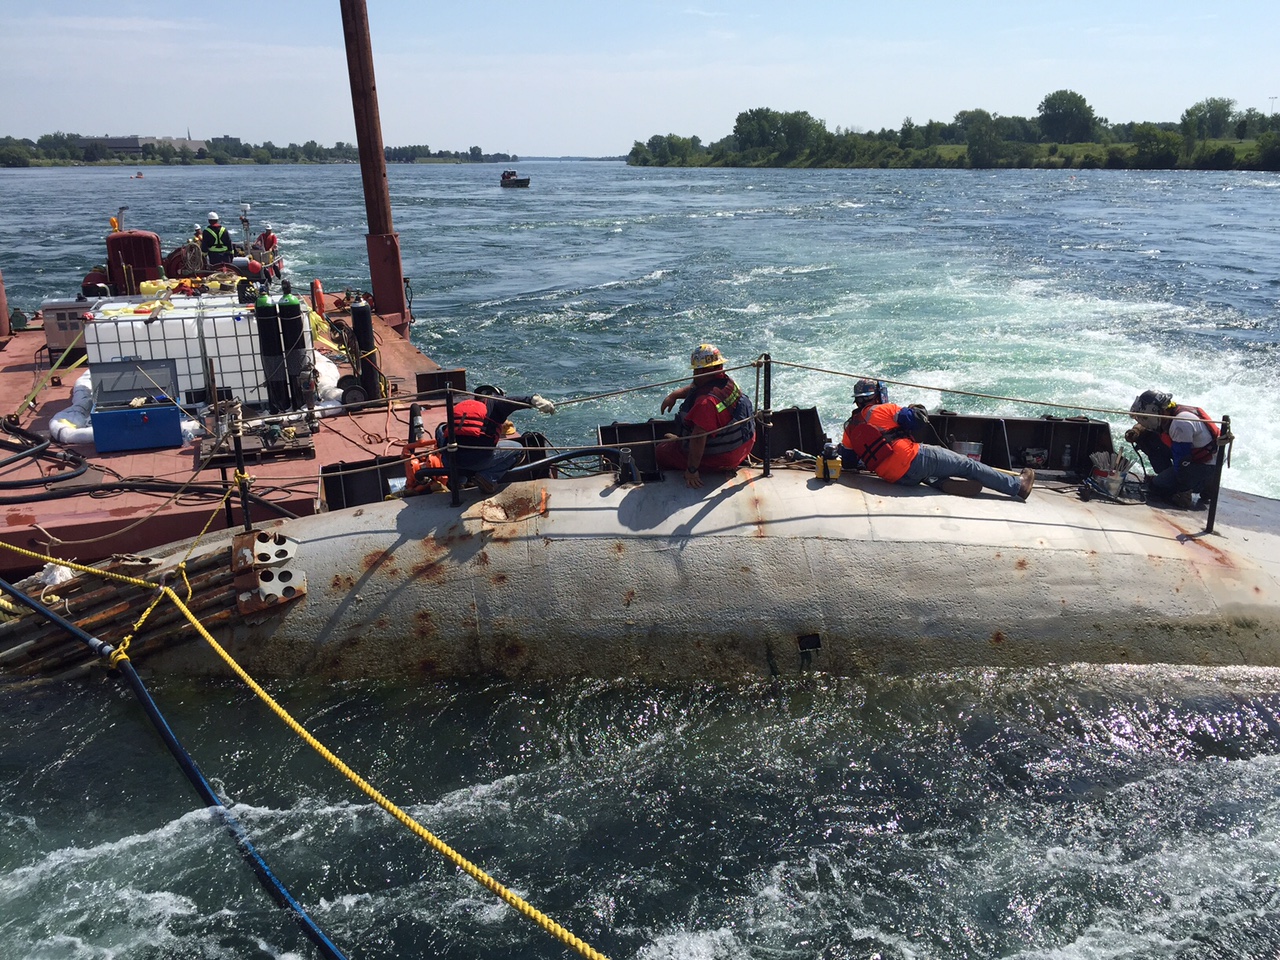 Tugboats not strong enough to complete river work: TSB